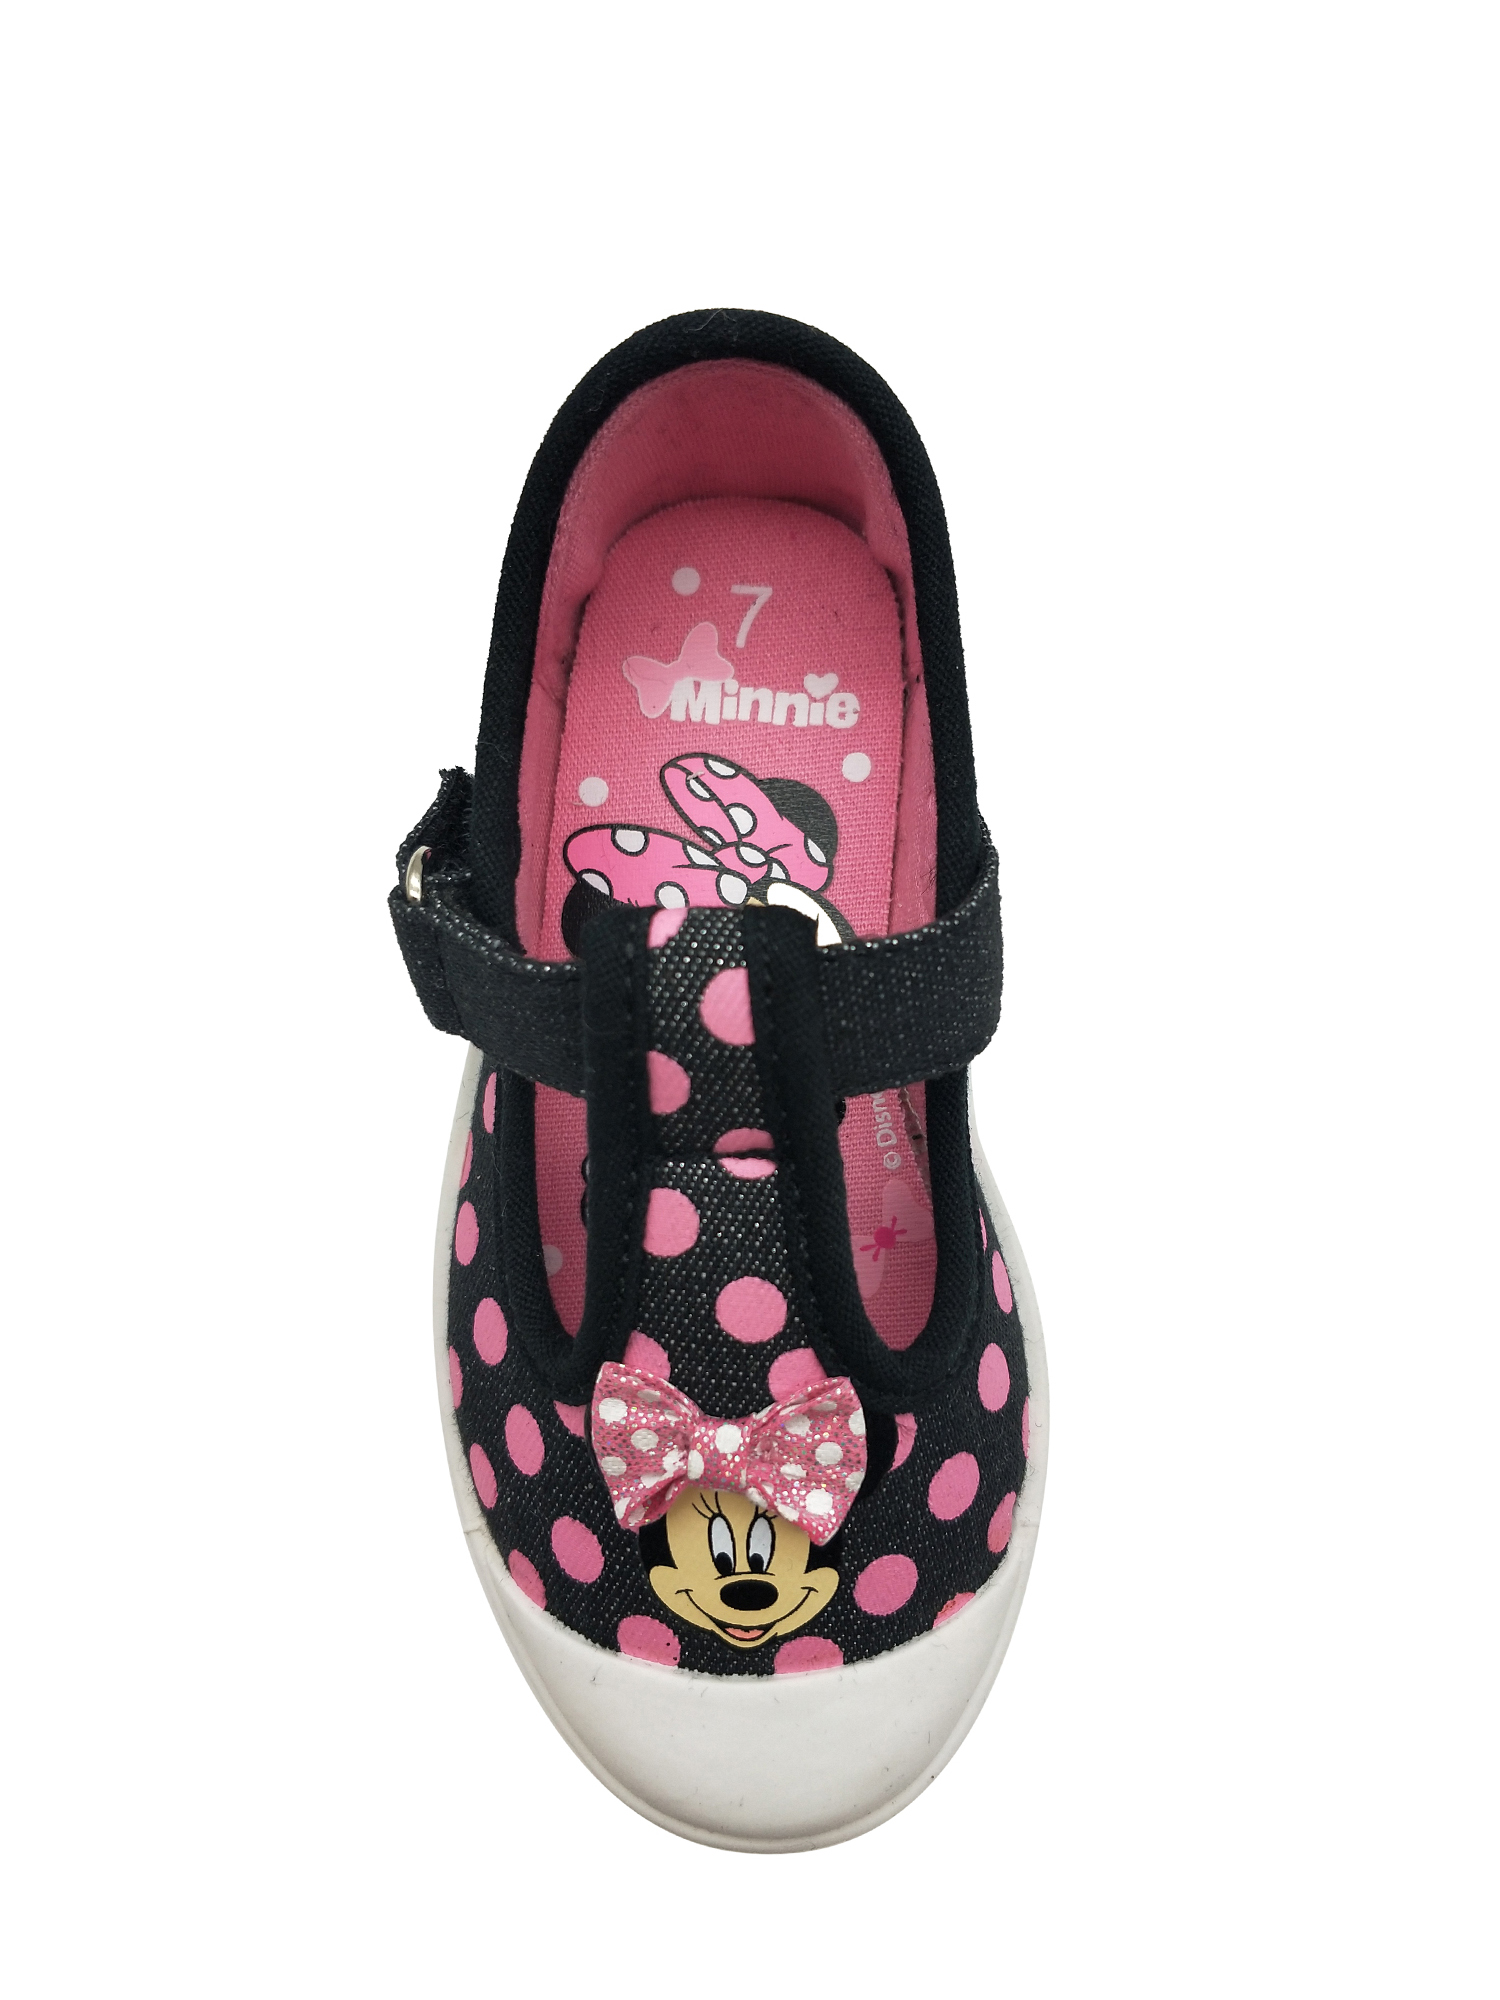 Minnie Mouse Polka Dot T-Strap Casual Shoe (Toddler Girls) - image 4 of 6